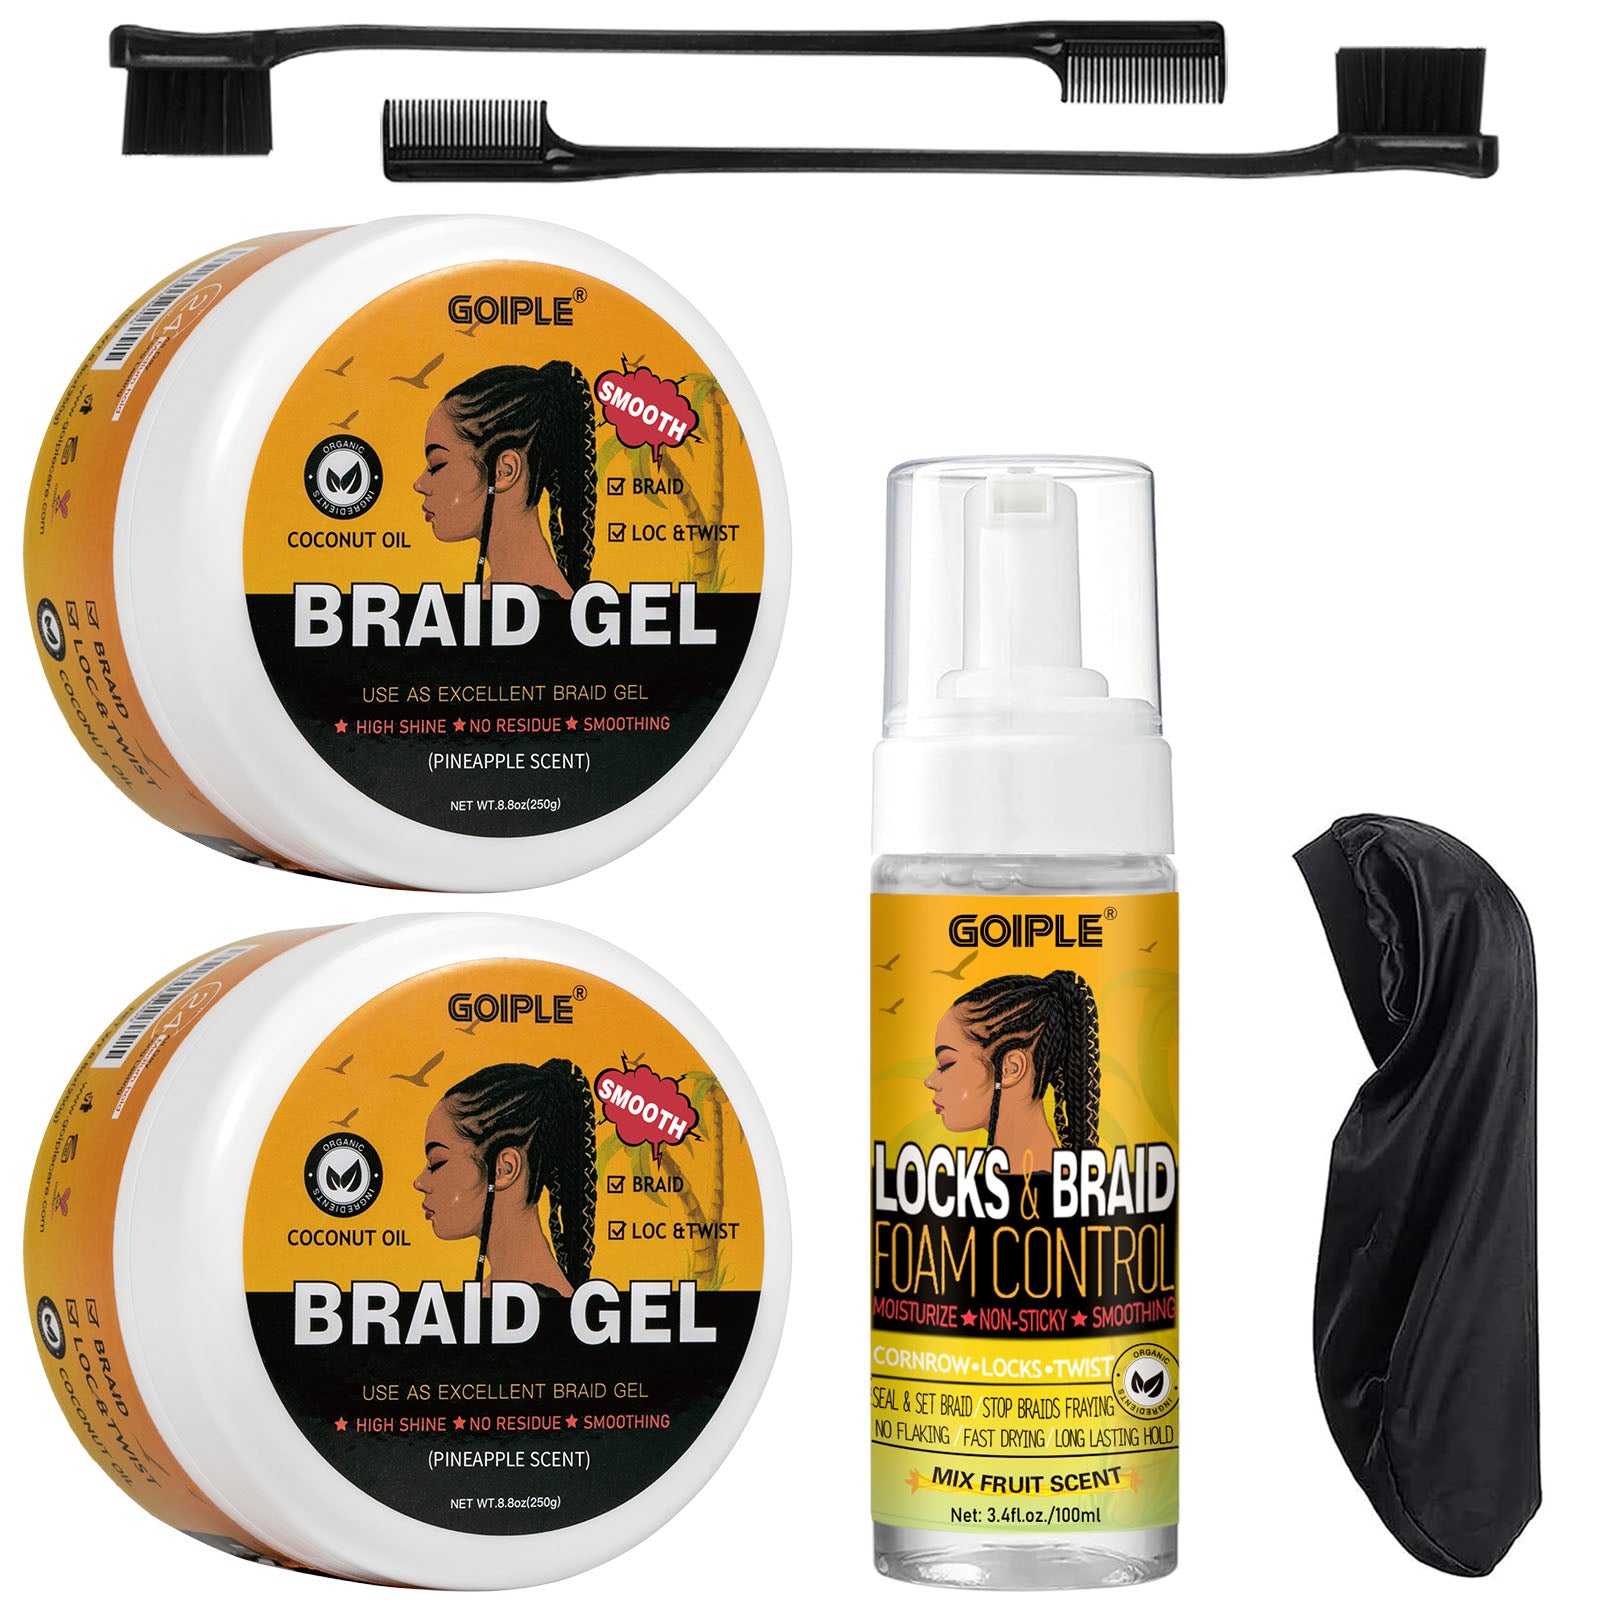 16oz-Strong-Hold-Braid-Gel - Extreme Hold Hair Styling Essential